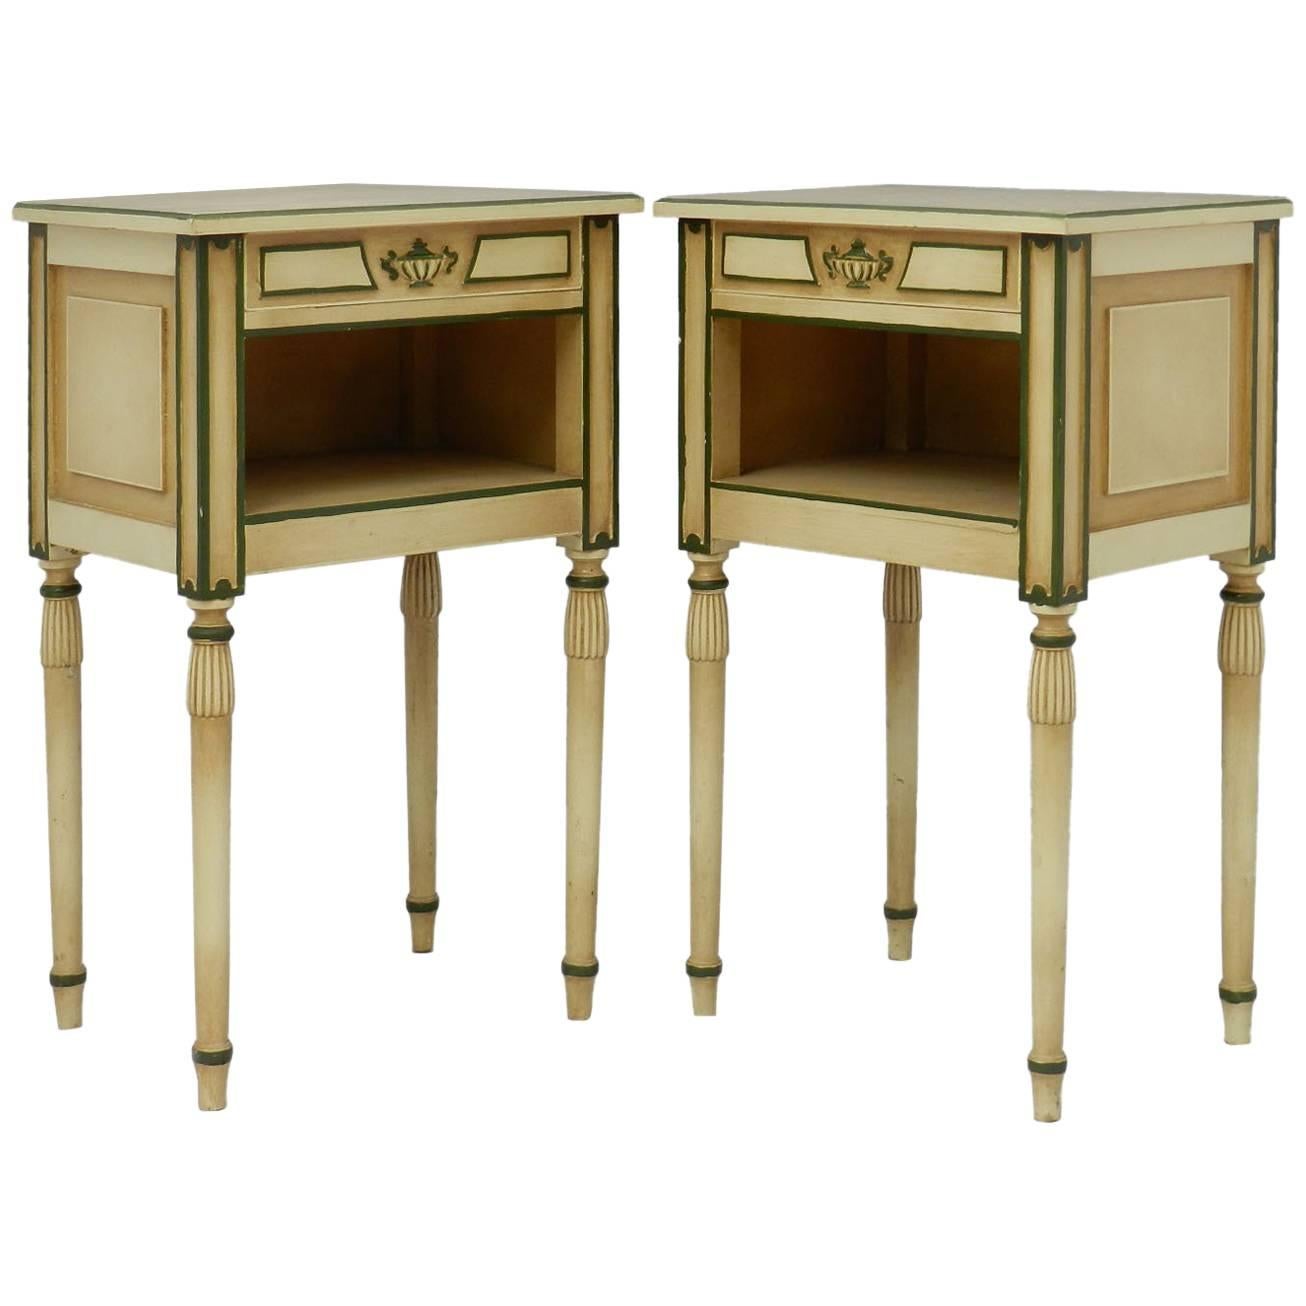 Pair of Side Cabinets or Bedside Tables, 20th Century, Directoire Empire Revival